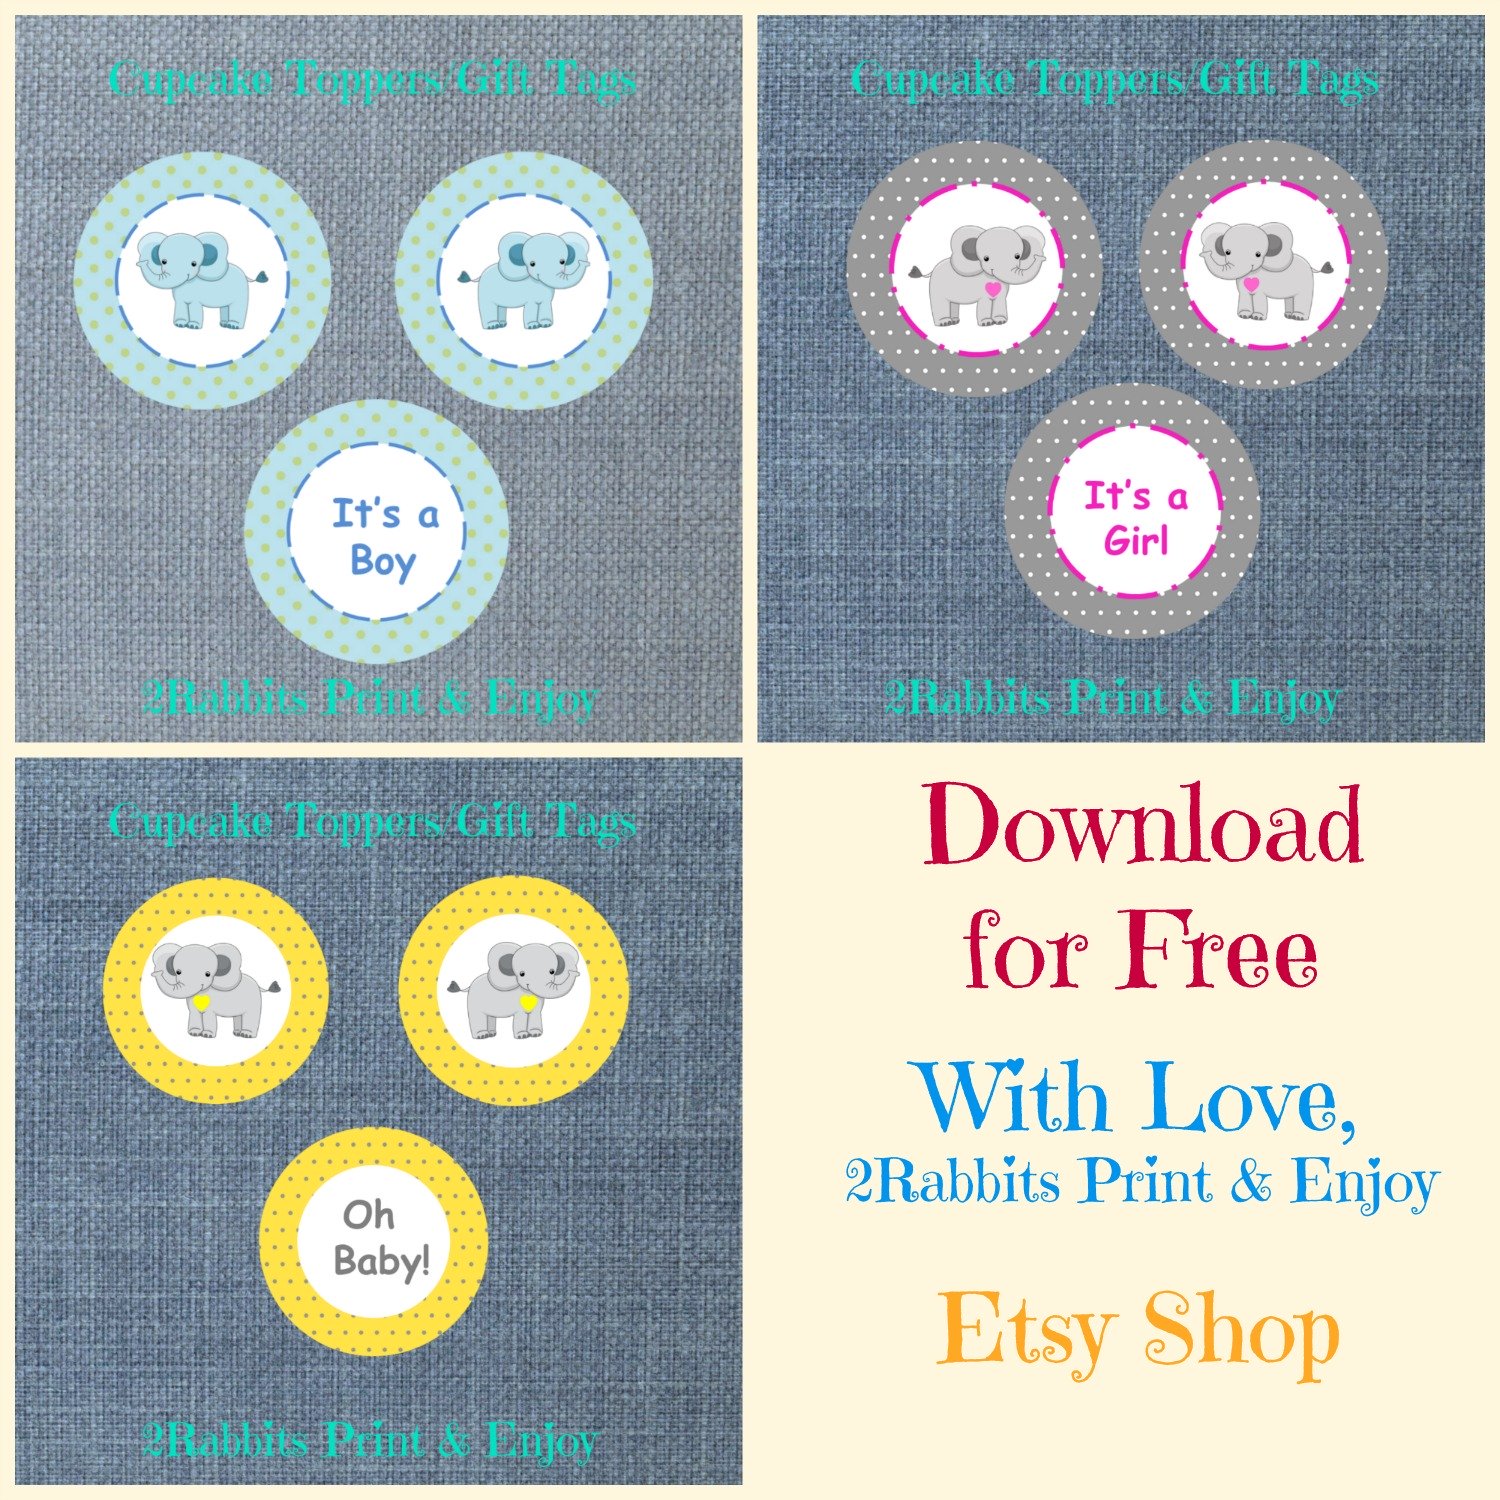 Free Printable Elephant Cupcake Toppers or Gift Tags